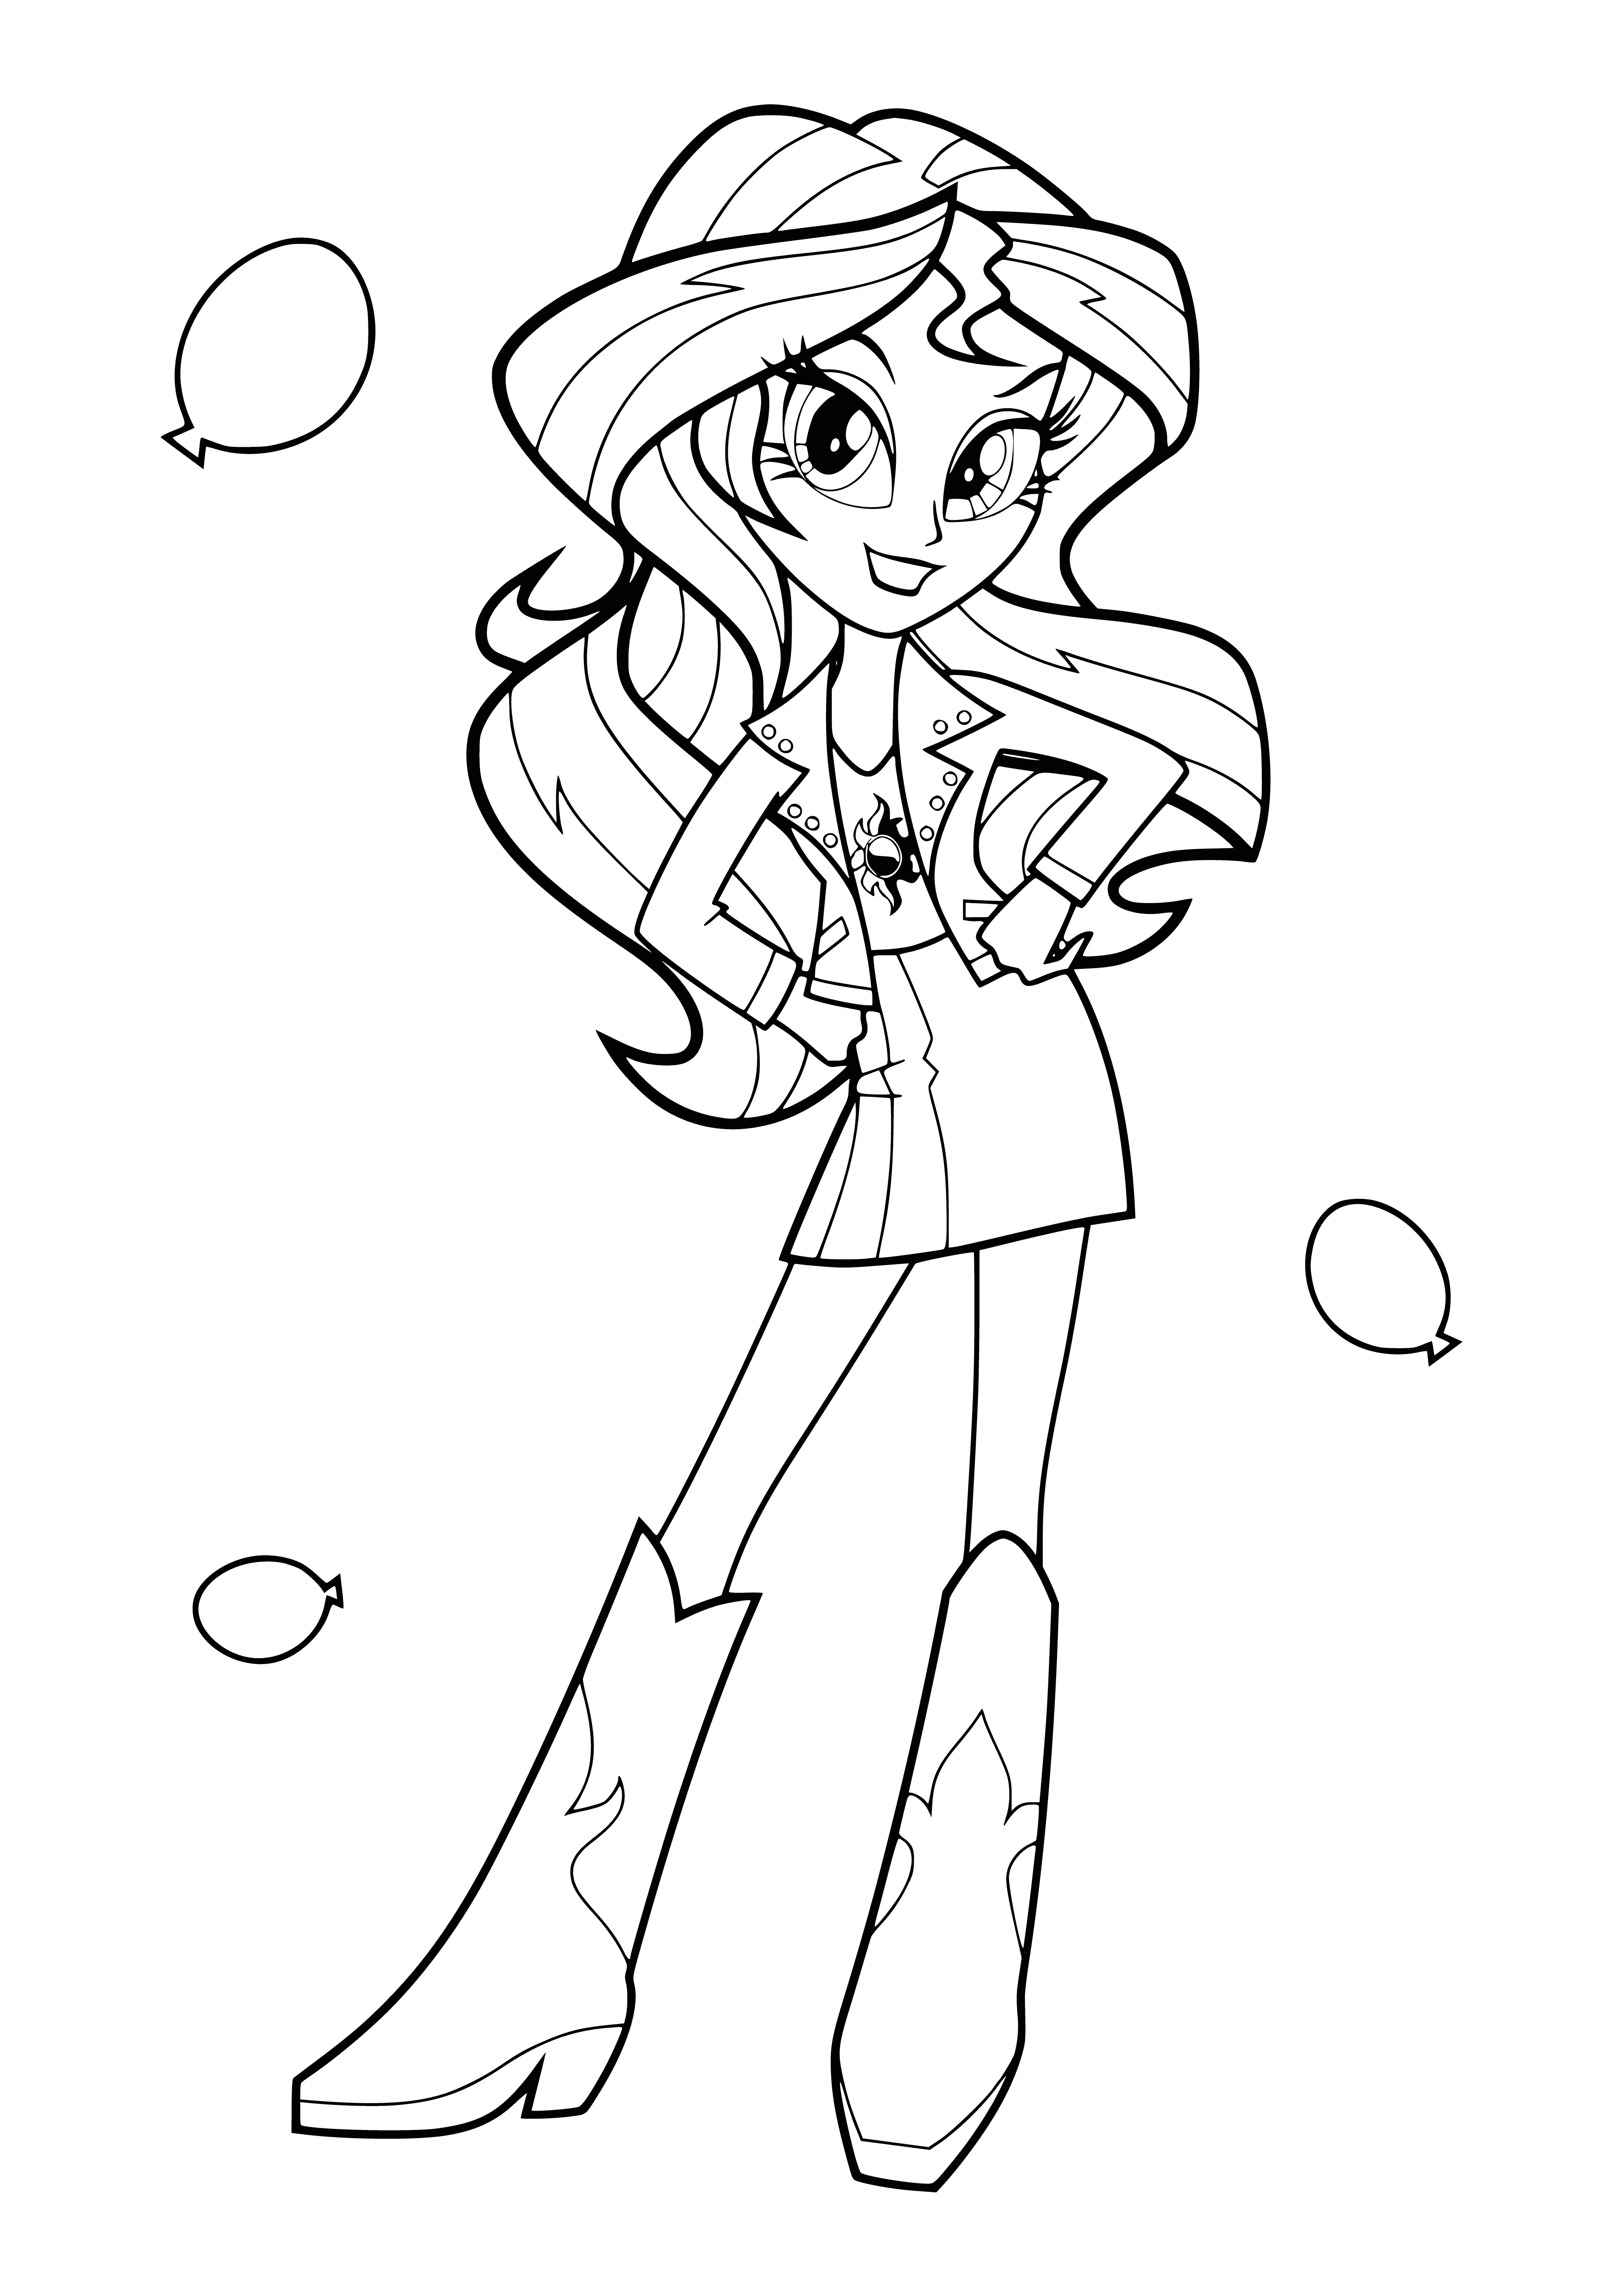 coloring page: Sunset Shimmer wears a sleeveless, purple and pink dress, white laces, and a small tiara to complete her look. She stares with a serious expression.